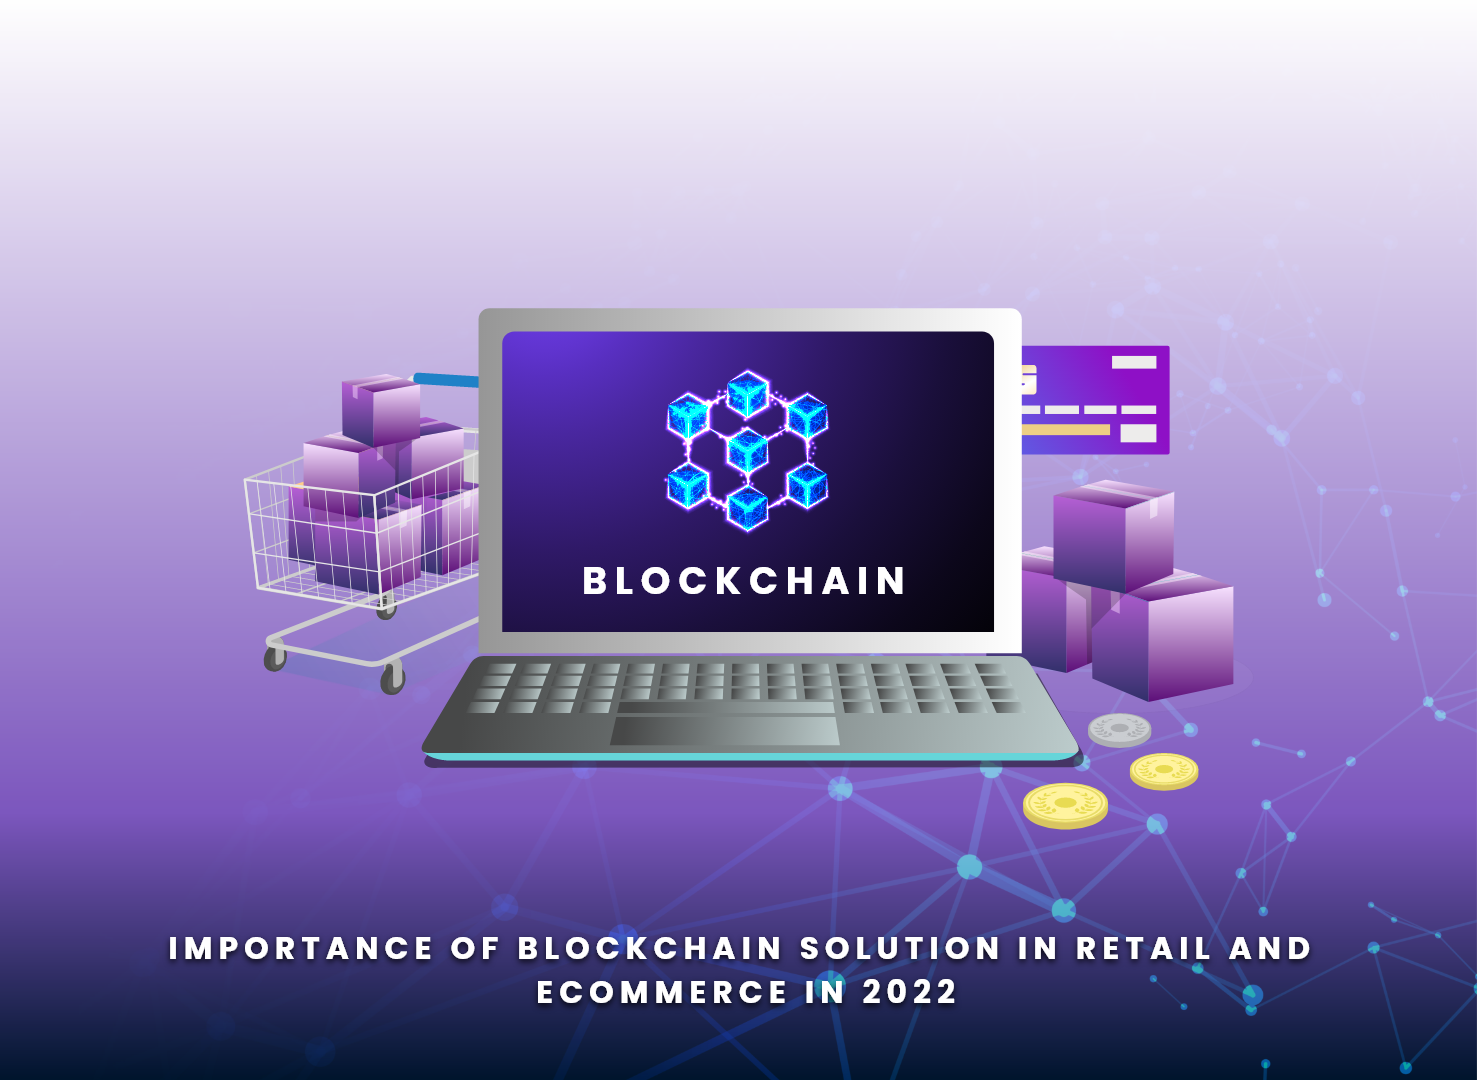 Importance Of Blockchain Solution in Retail & eCommerce in 2022